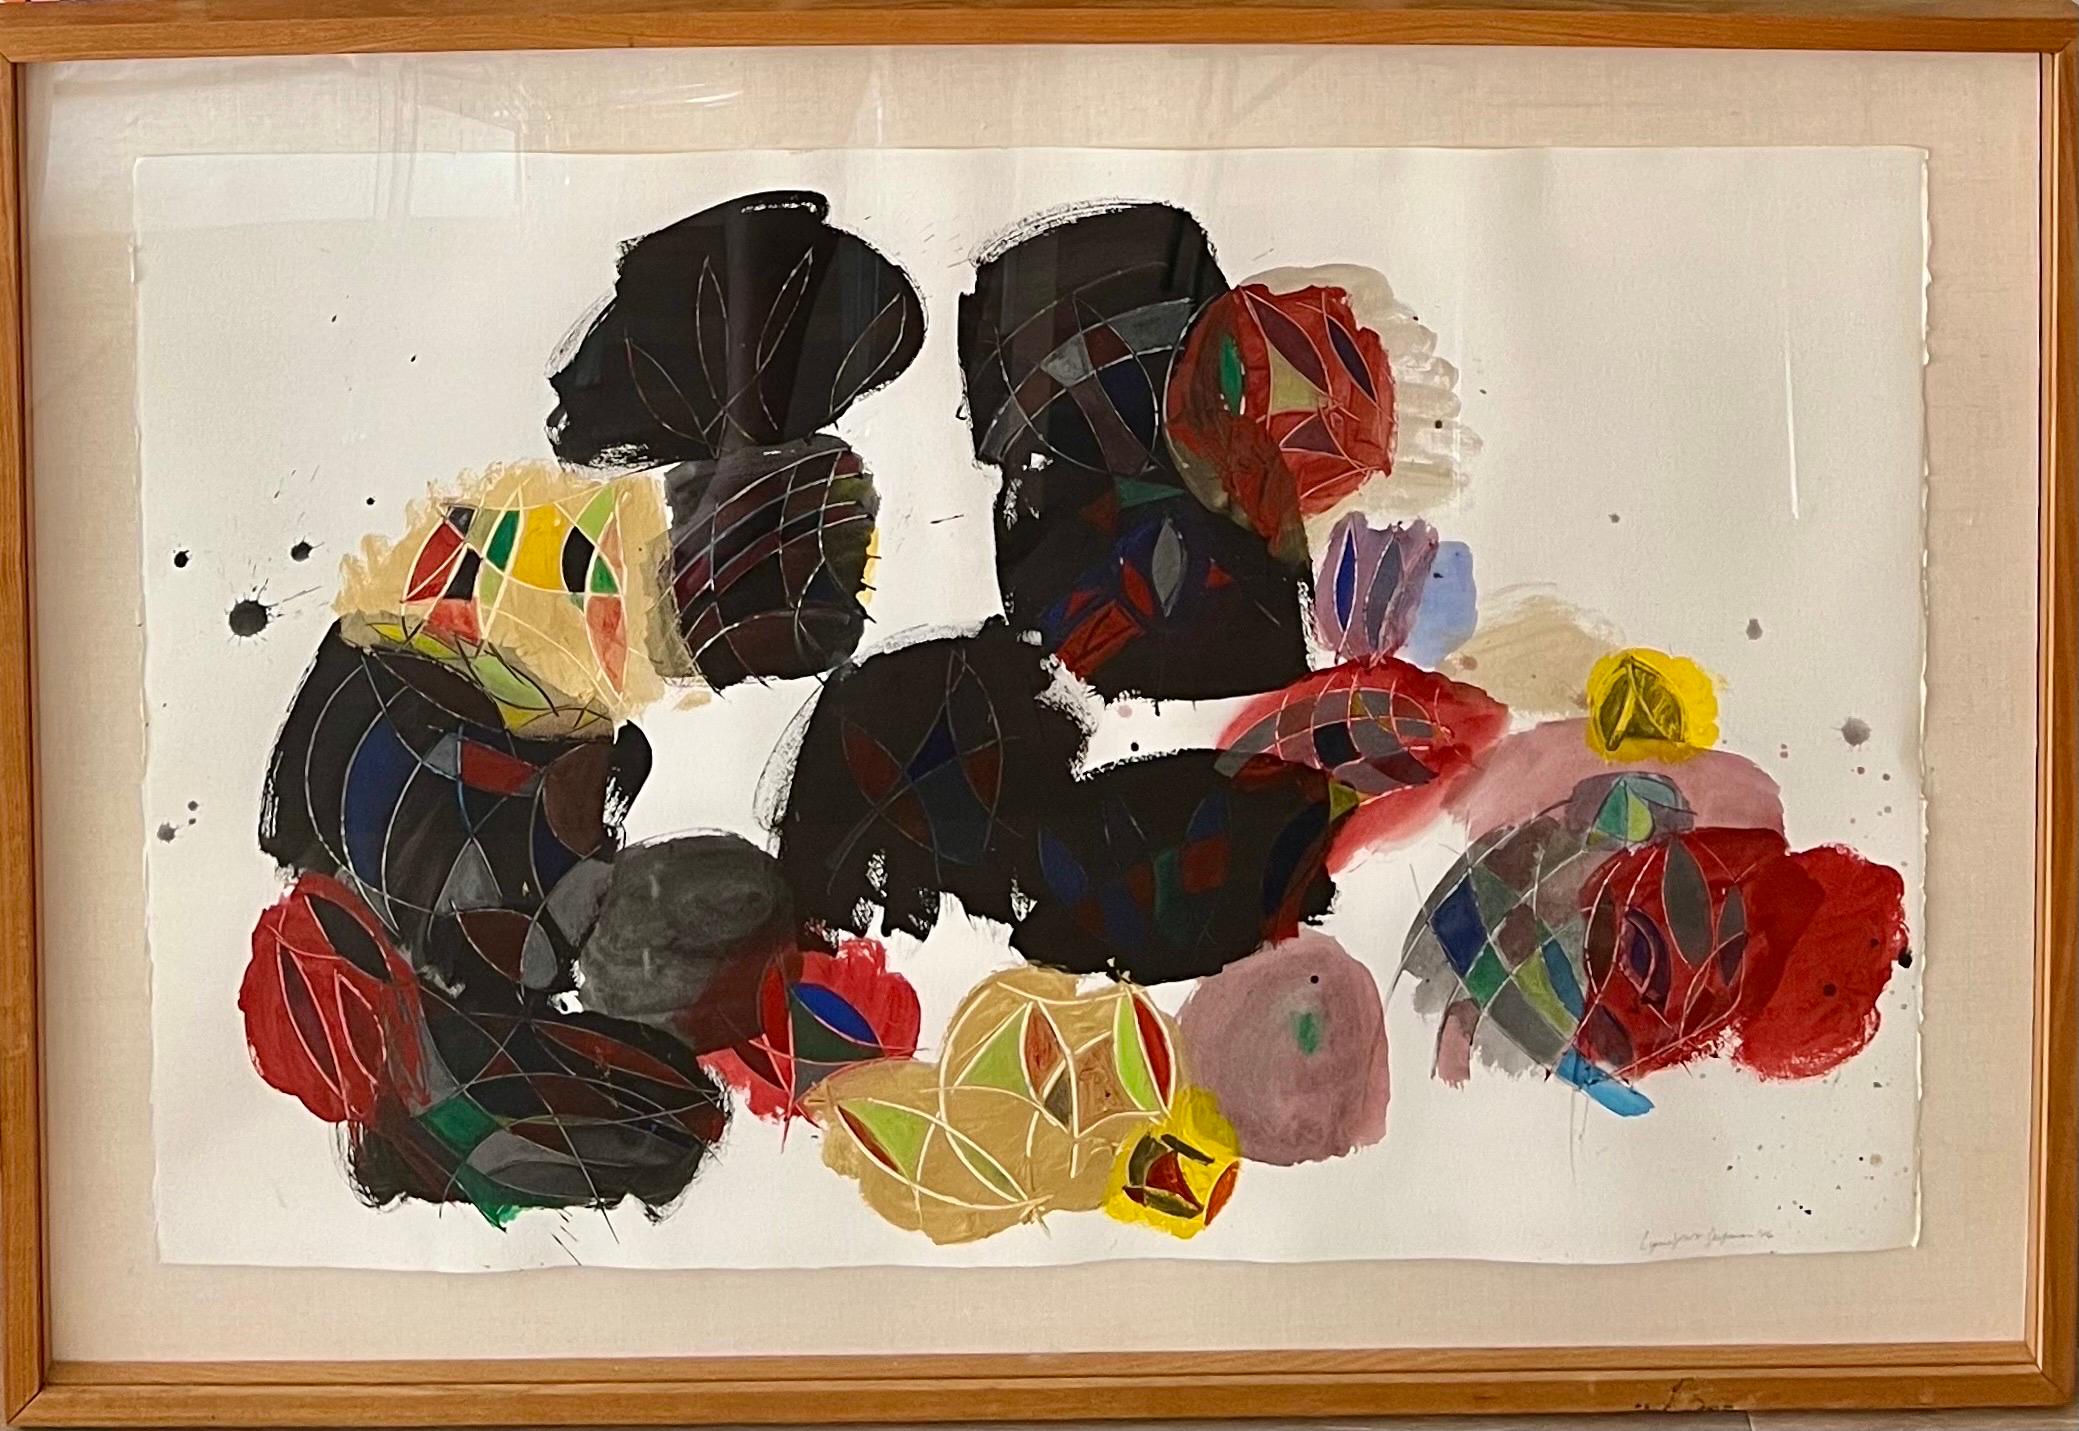 Lynne Golob Gelfman, American (1944-2020)
Abstract Composition in colors
Acrylic paint and watercolor on paper
Hand signed and dated recto
Sheet: 40 X 26 inches
Frame dimensions: 47.5 X 32.5 frame with glazing


Gelfman is often praised for using